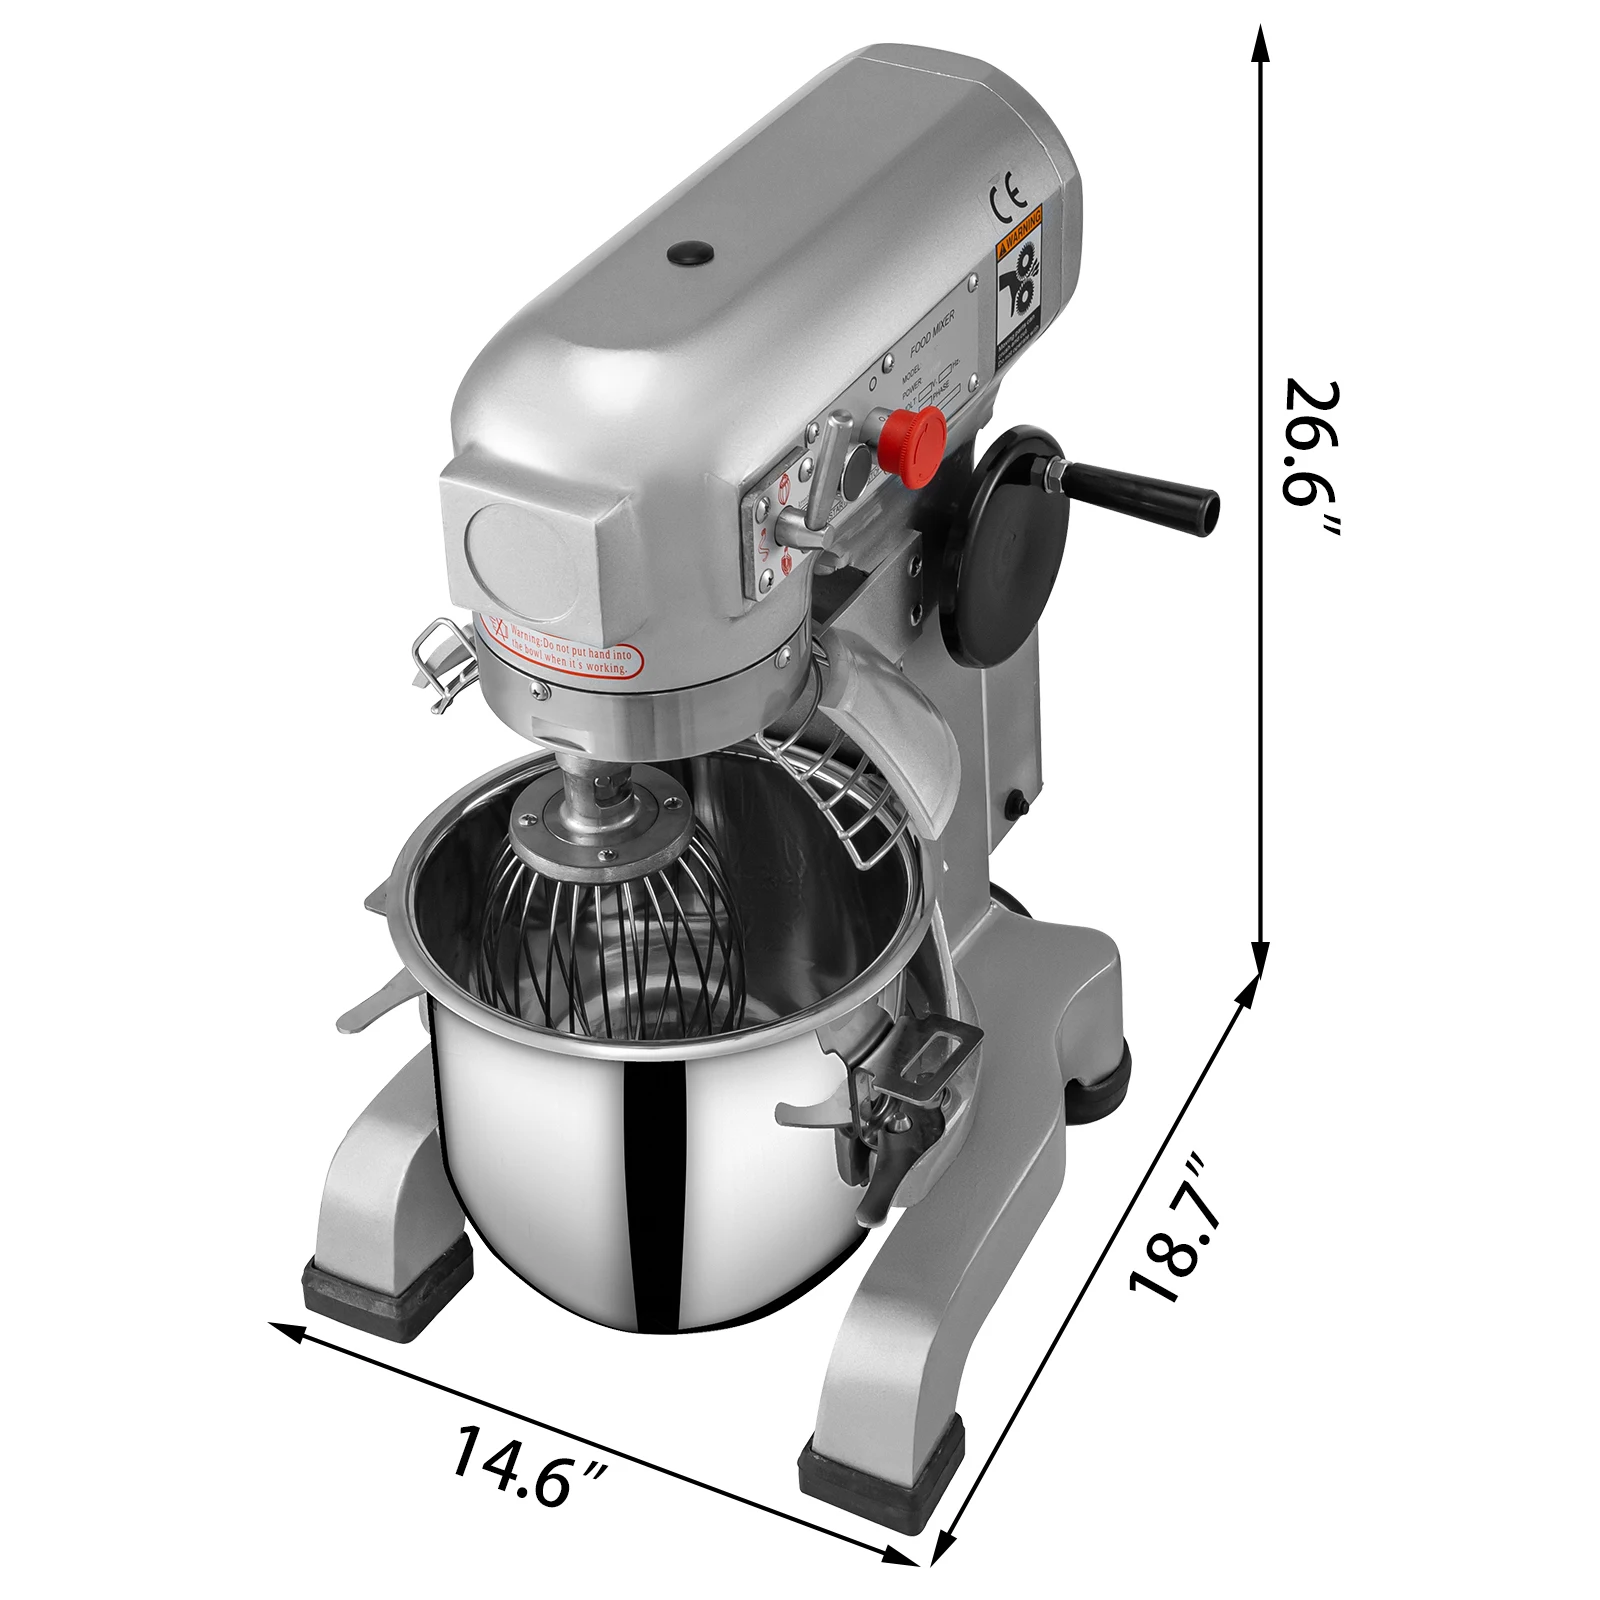 https://ae01.alicdn.com/kf/S5b5a2d016e5b4792b3f7e0779b26ba91o/VEVOR-Electric-Dough-Machine-10-15-20-30L-Stainless-Steel-Commercial-Cream-Egg-Whisk-Mixer-Processor.jpg